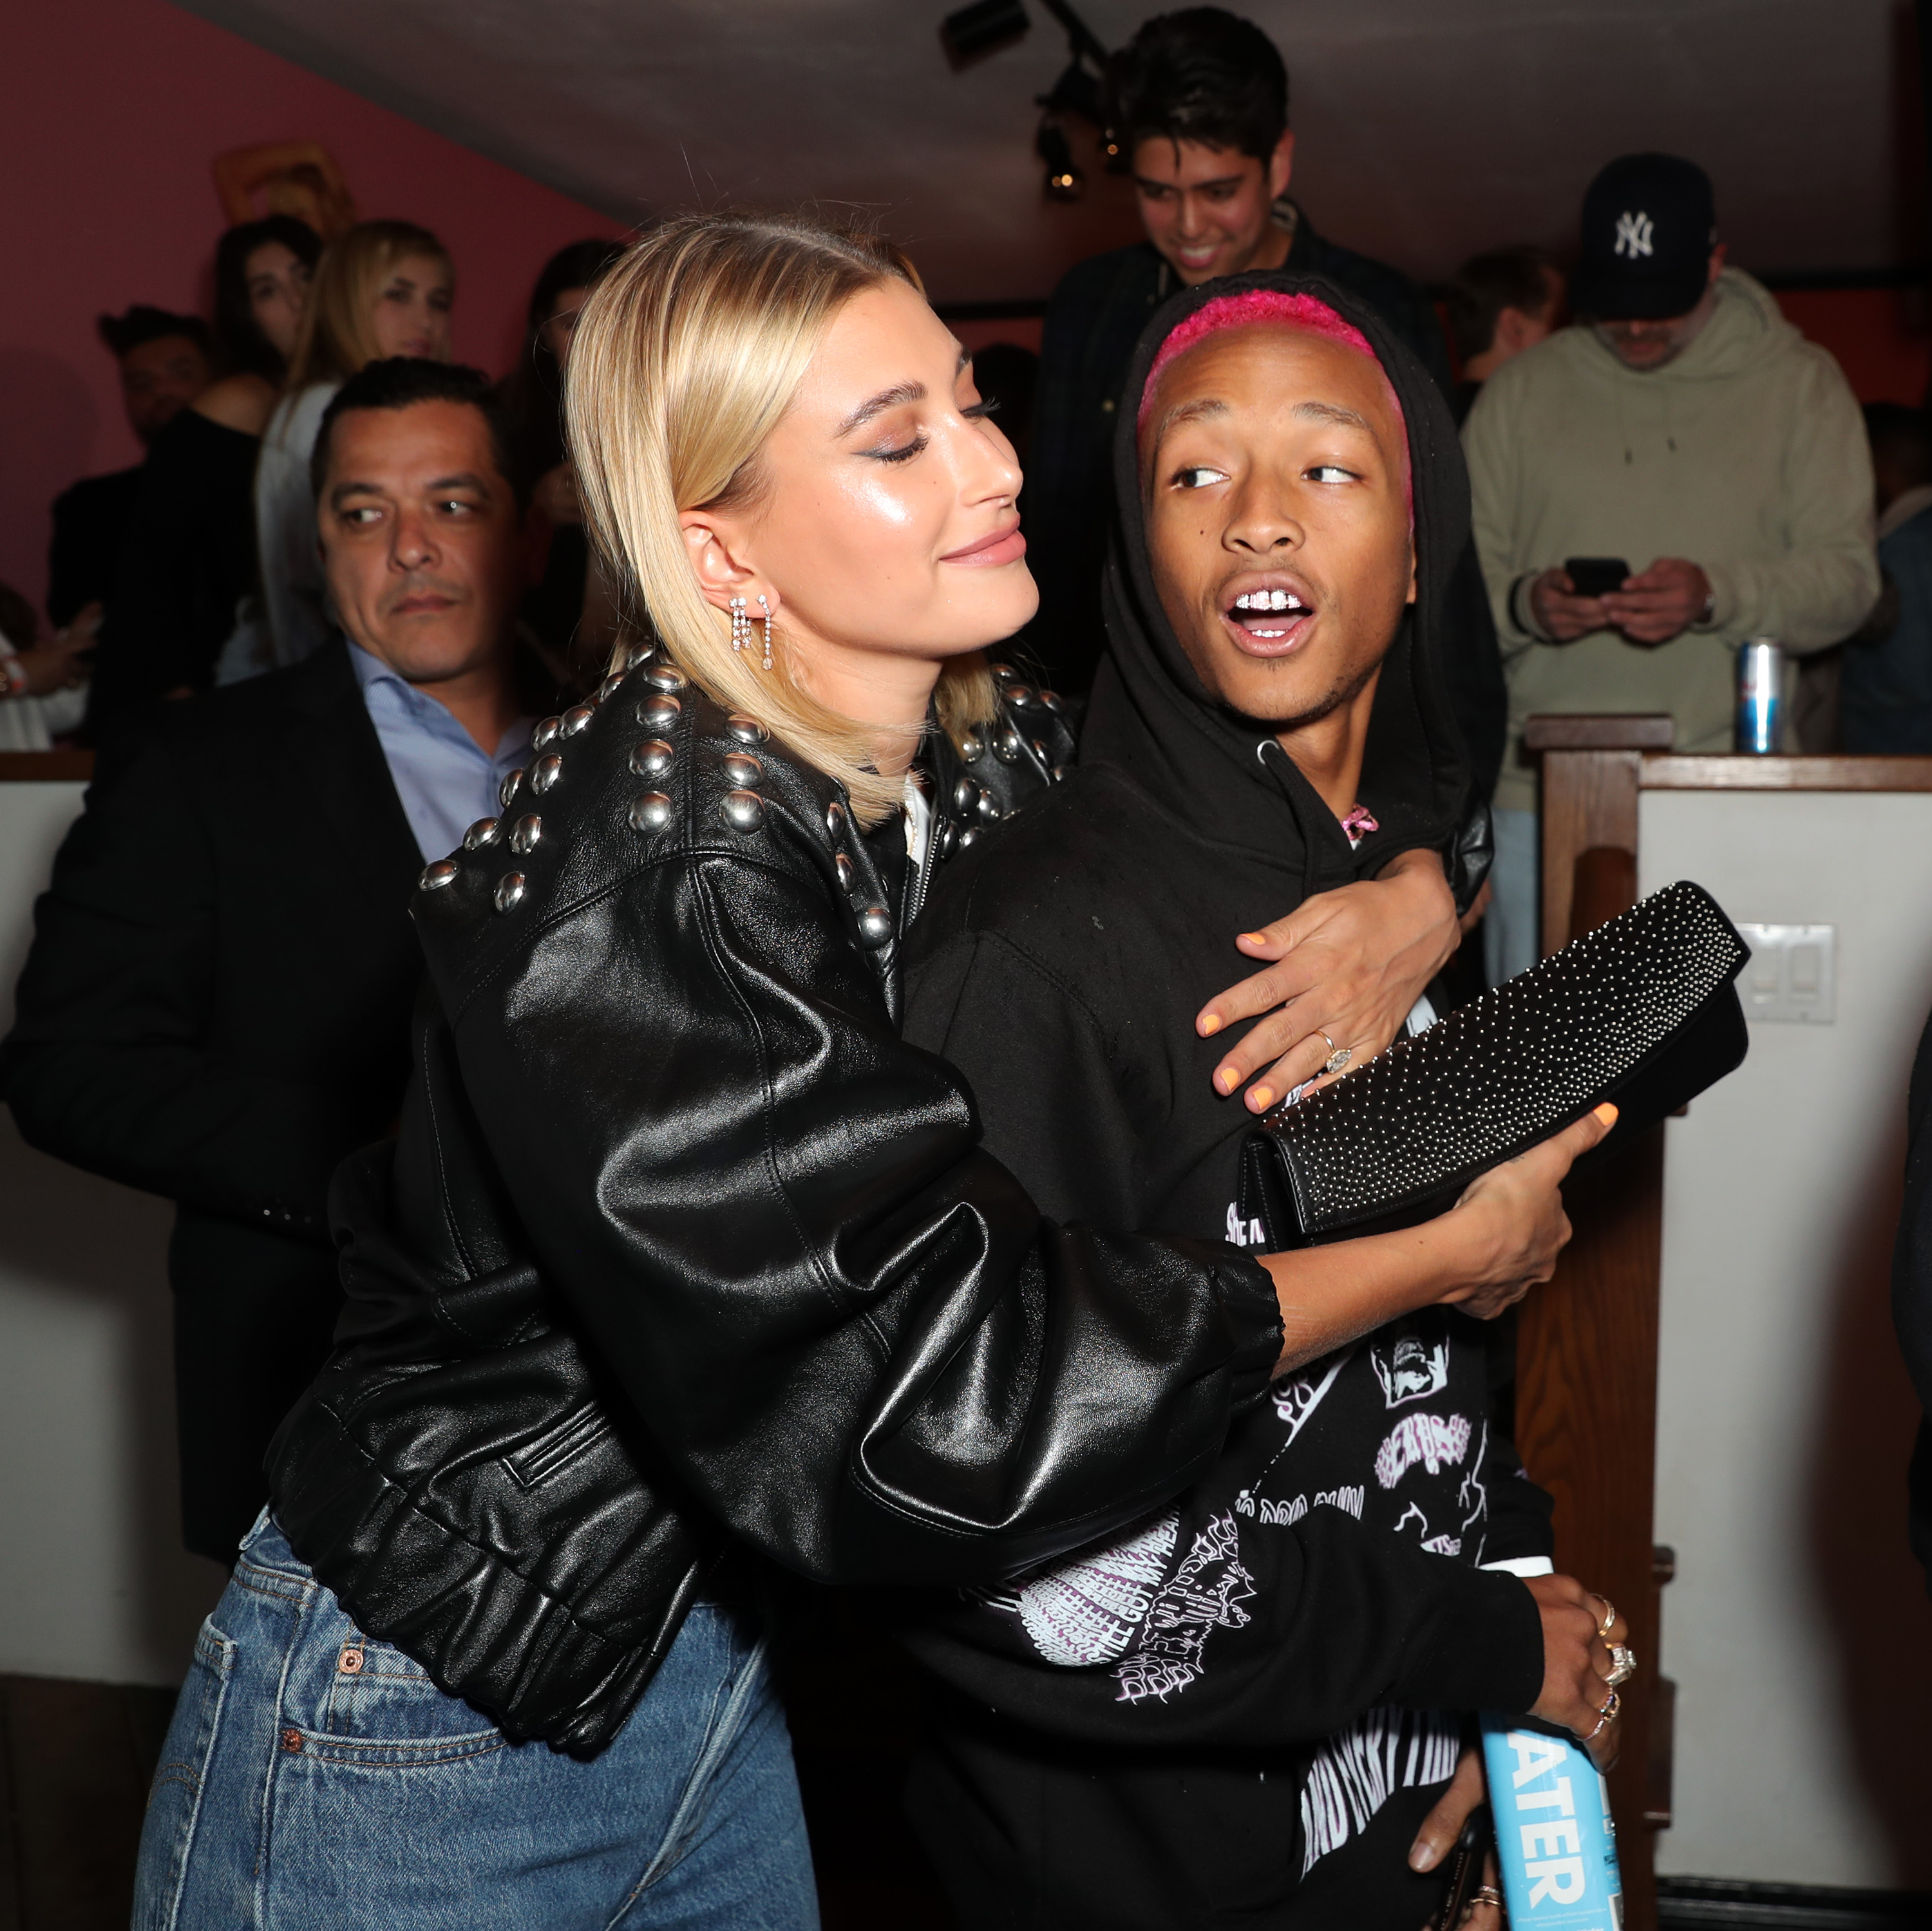 Justin shared a snapshot of Hailey hugging the couple's friend Jaden Smith